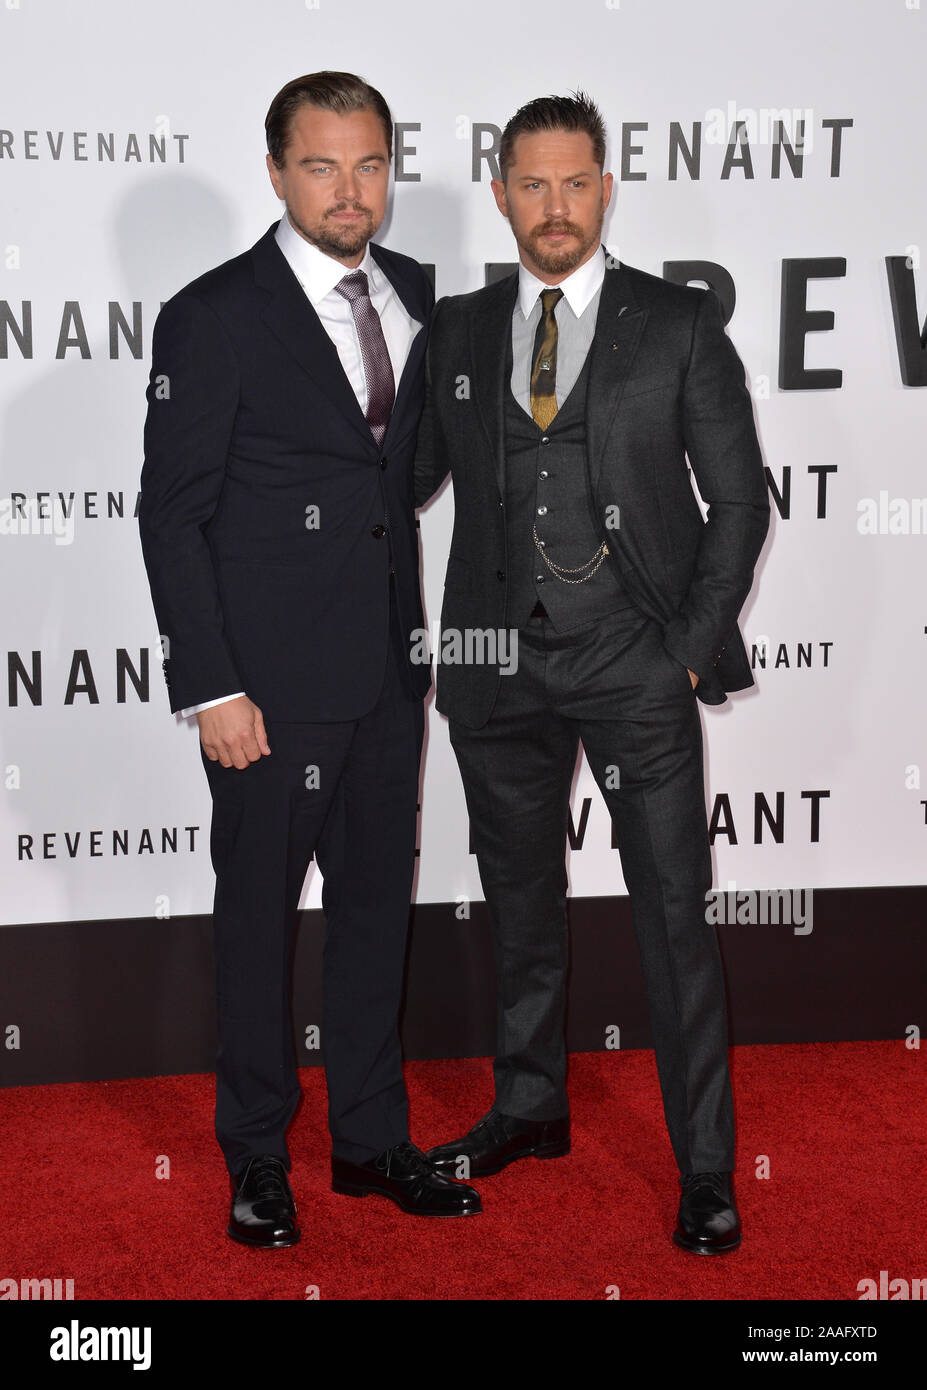 LOS ANGELES, CA - DECEMBER 16, 2015: Actors Leonardo DiCaprio & Tom Hardy  (right) at the Los Angeles premiere of their movie "The Revenant" © 2015  Paul Smith / Featureflash Stock Photo - Alamy